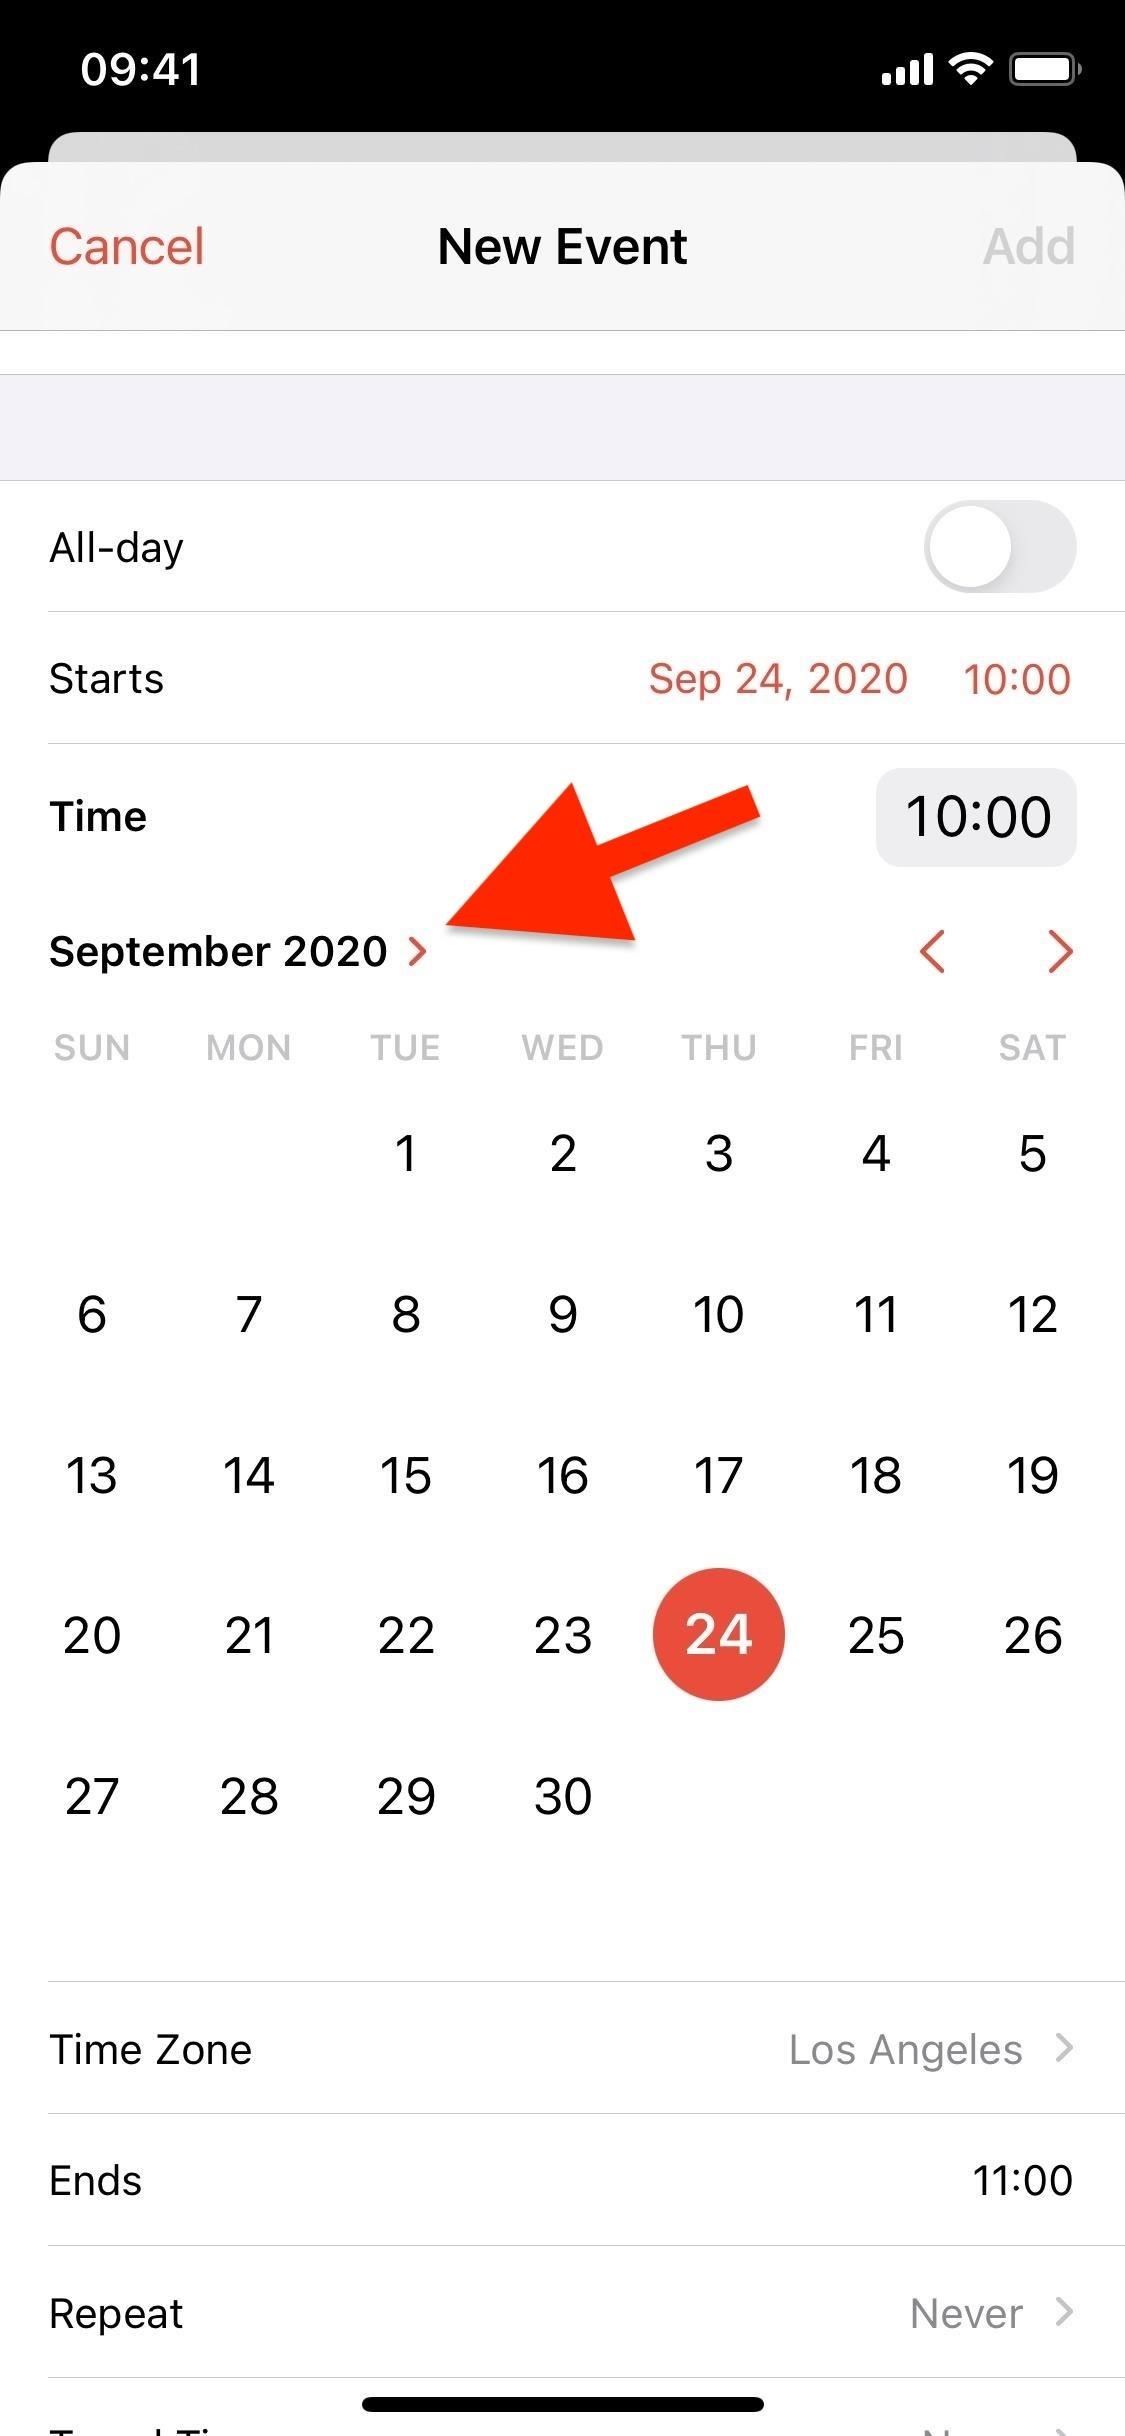 Bring Back the Scroll Wheel in iOS 14 to Pick Dates & Times Like You Could Before